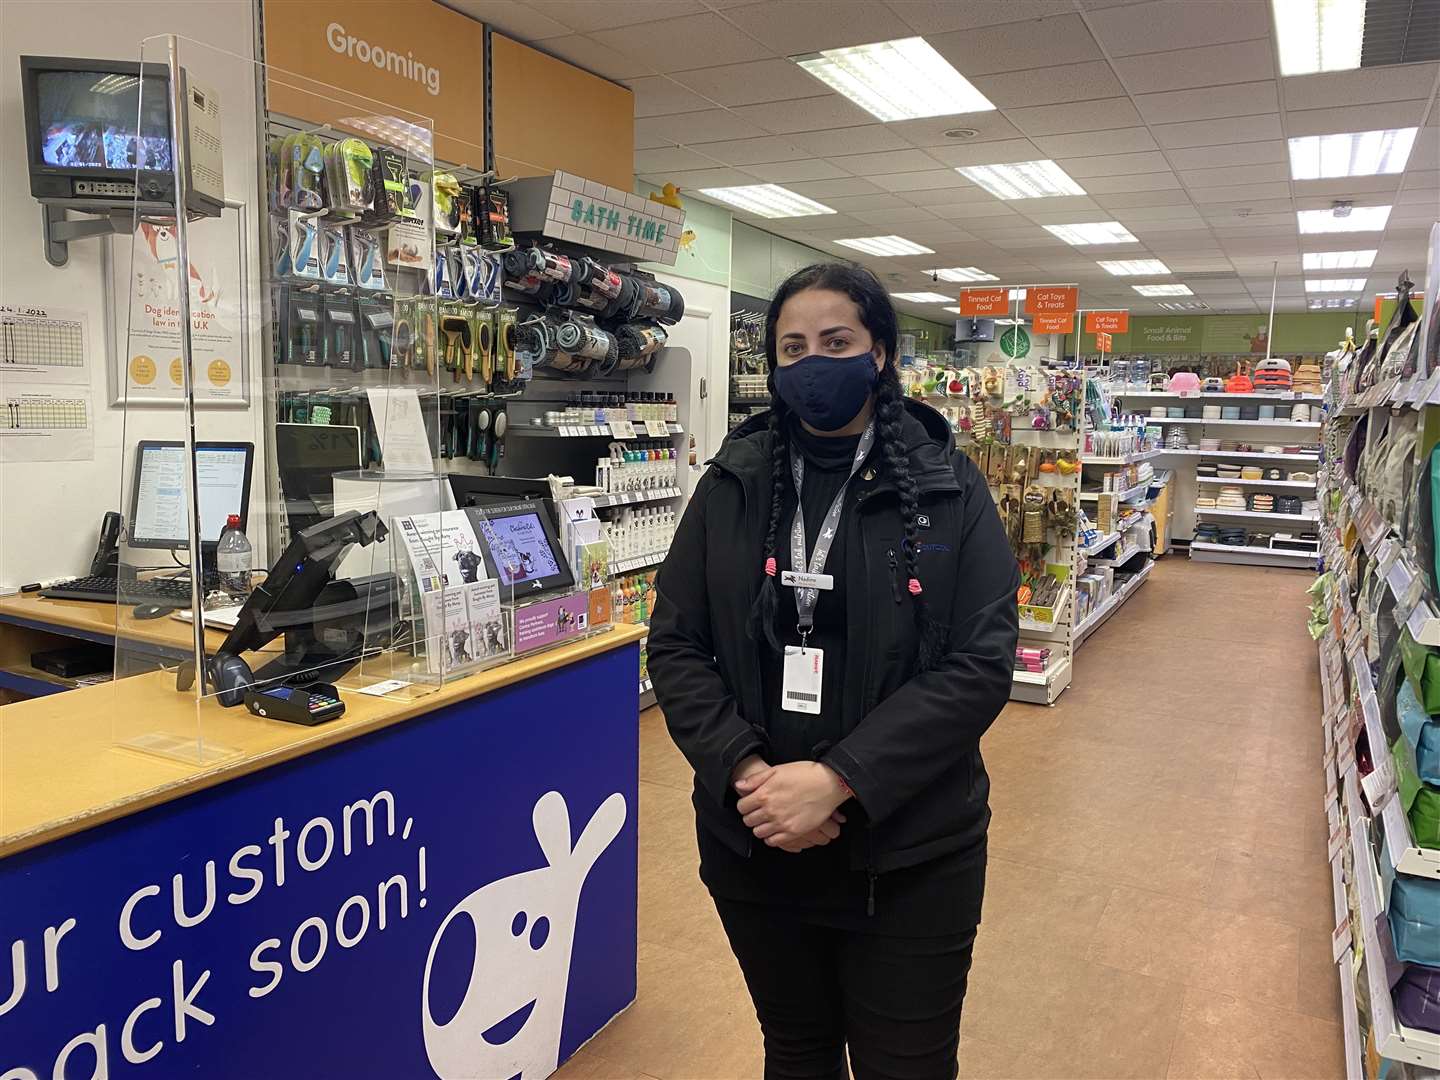 Nadine, from Pets Corner, in Week Street, will carry on working with a mask on